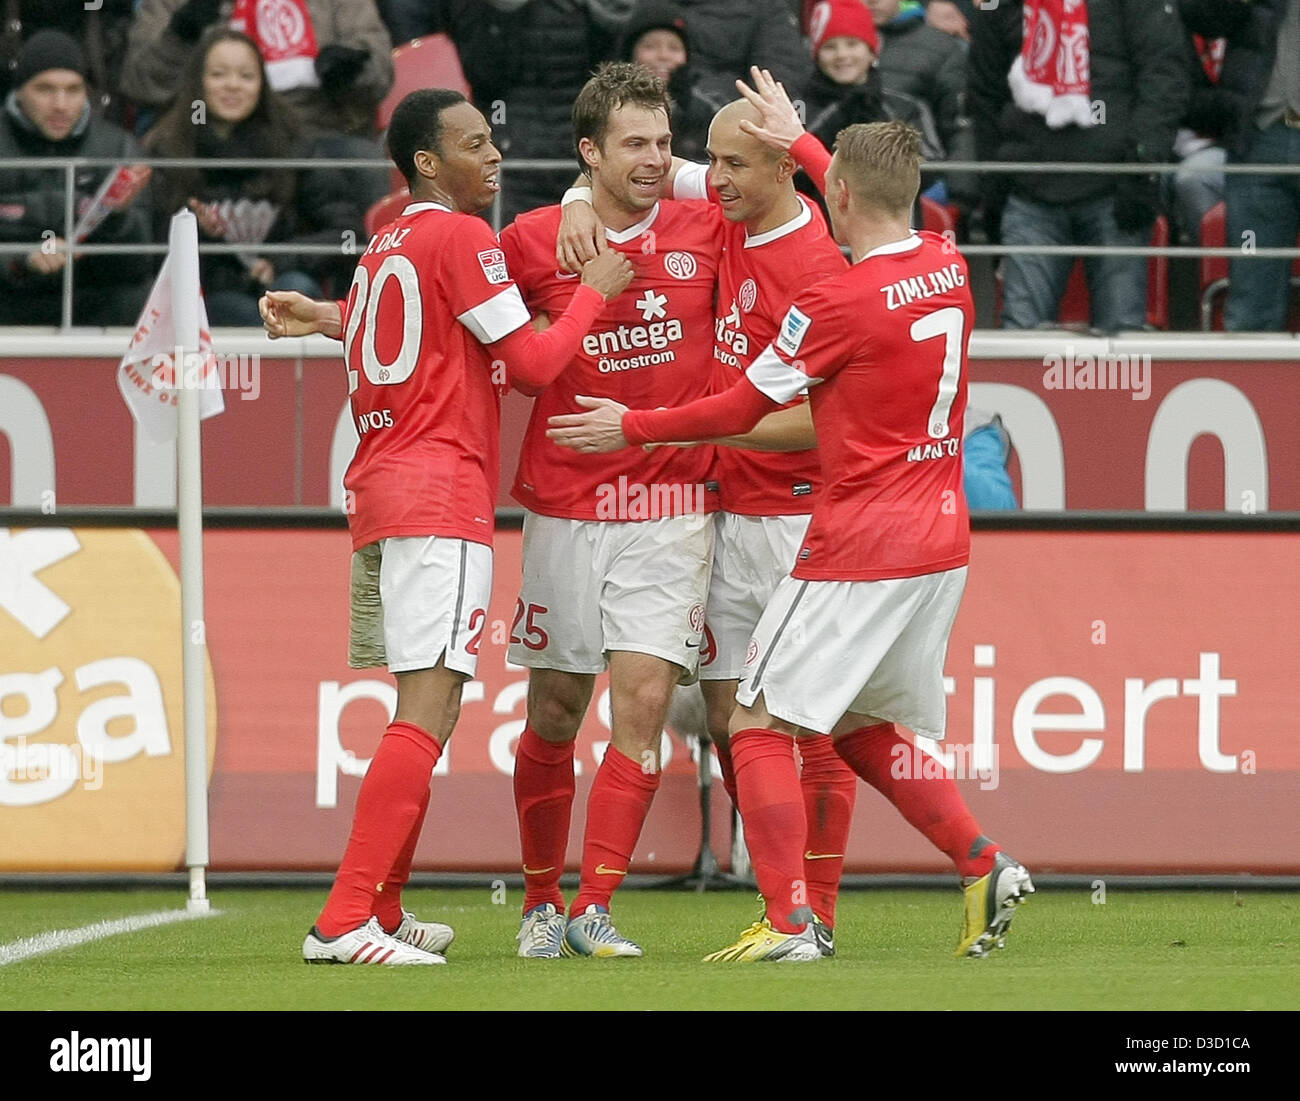 Mainz's Junior Diaz (L-R), Andreas Ivanschitz, Elkin Soto and Niki Zimling celebrate the 1-0 goal during the German Bundesliga soccer match between 1. FSV Mainz 05 and FC Schalke 04 at Coface Arena in Mainz, Germany, 16 February 2013. Photo: FREDRIK VON ERICHSEN (ATTENTION: EMBARGO CONDITIONS! The DFL permits the further utilisation of up to 15 pictures only (no sequntial pictures or video-similar series of pictures allowed) via the internet and online media during the match (including halftime), taken from inside the stadium and/or prior to the start of the match. The DFL permits the unrestri Stock Photo